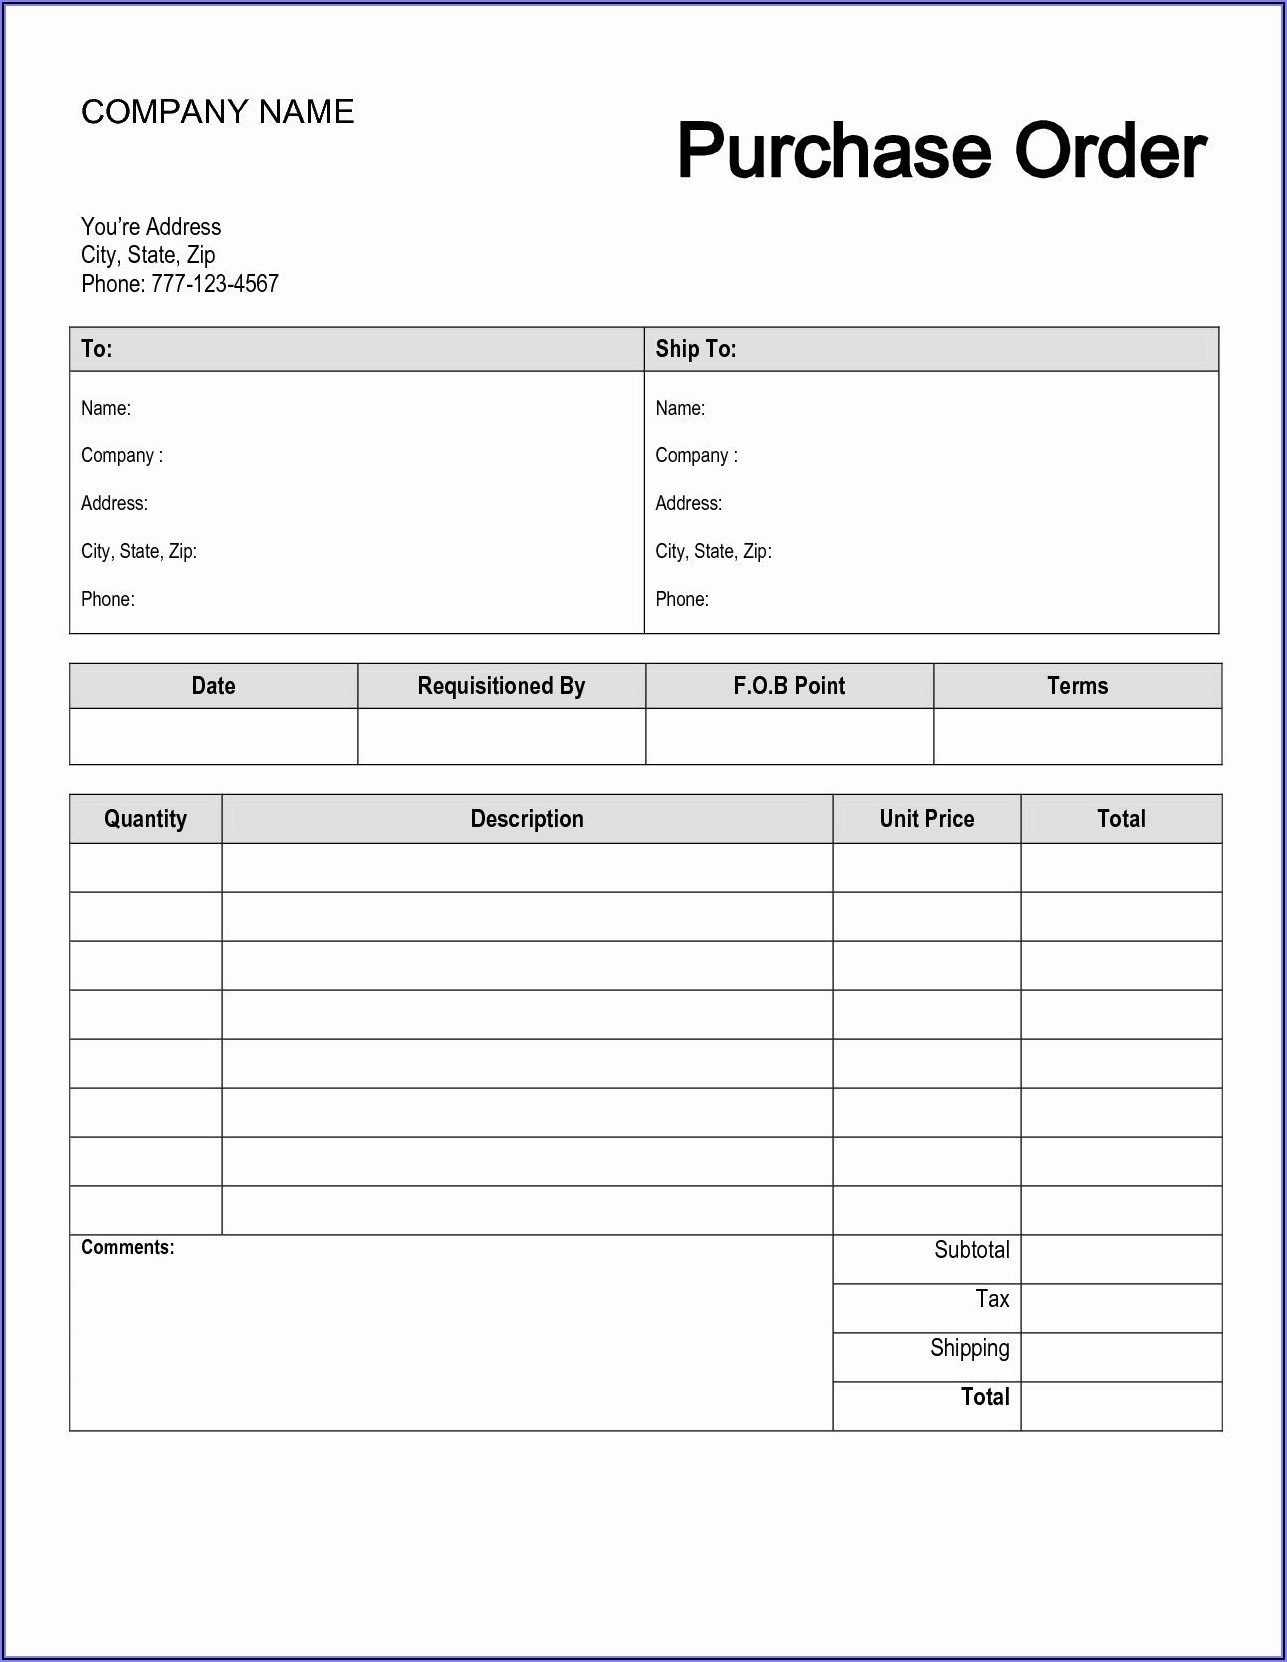 Purchase Order Request Form Template Word Free